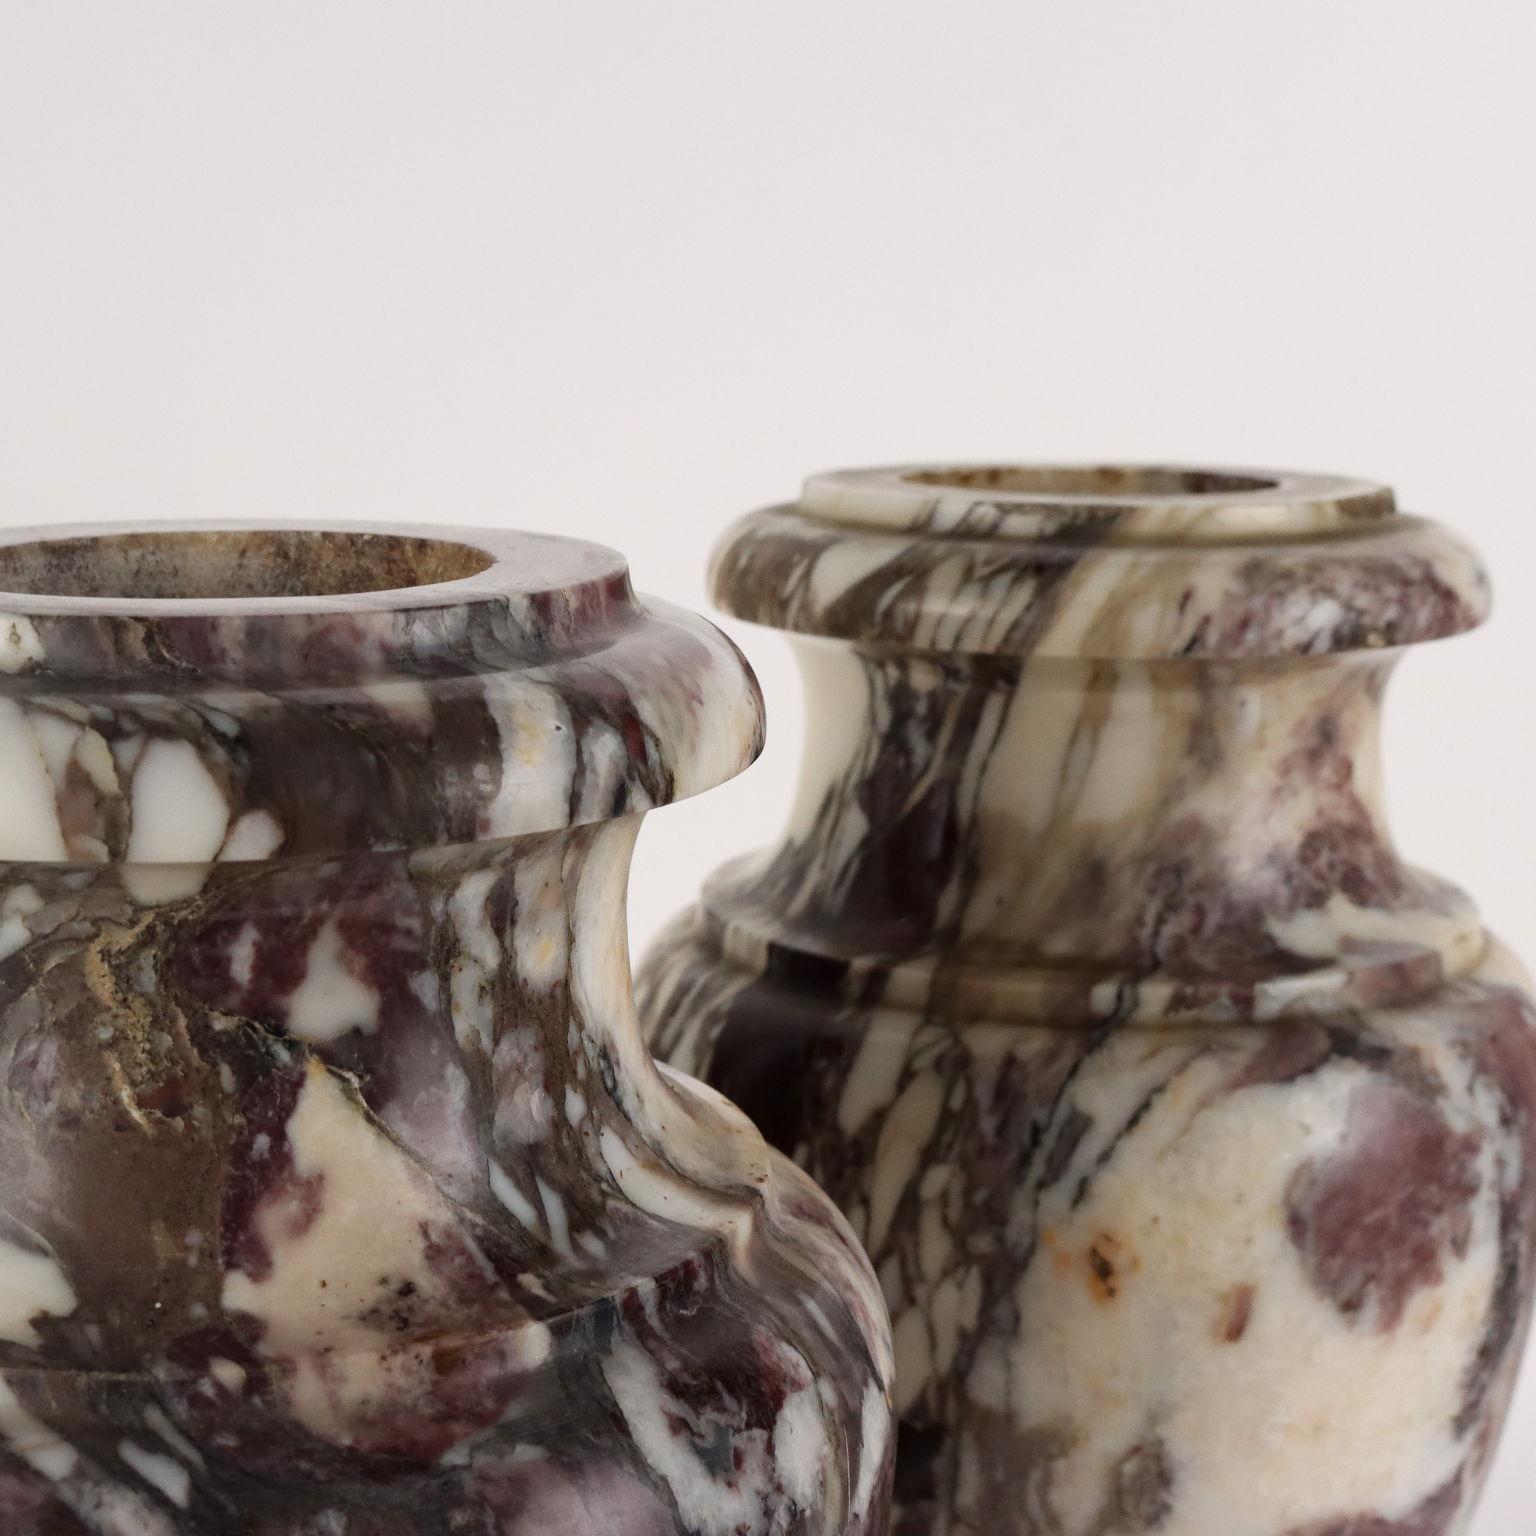 Other Pair of Vases Marble Italy XIX-XX Century, Italy, Late '800s - Early '900s